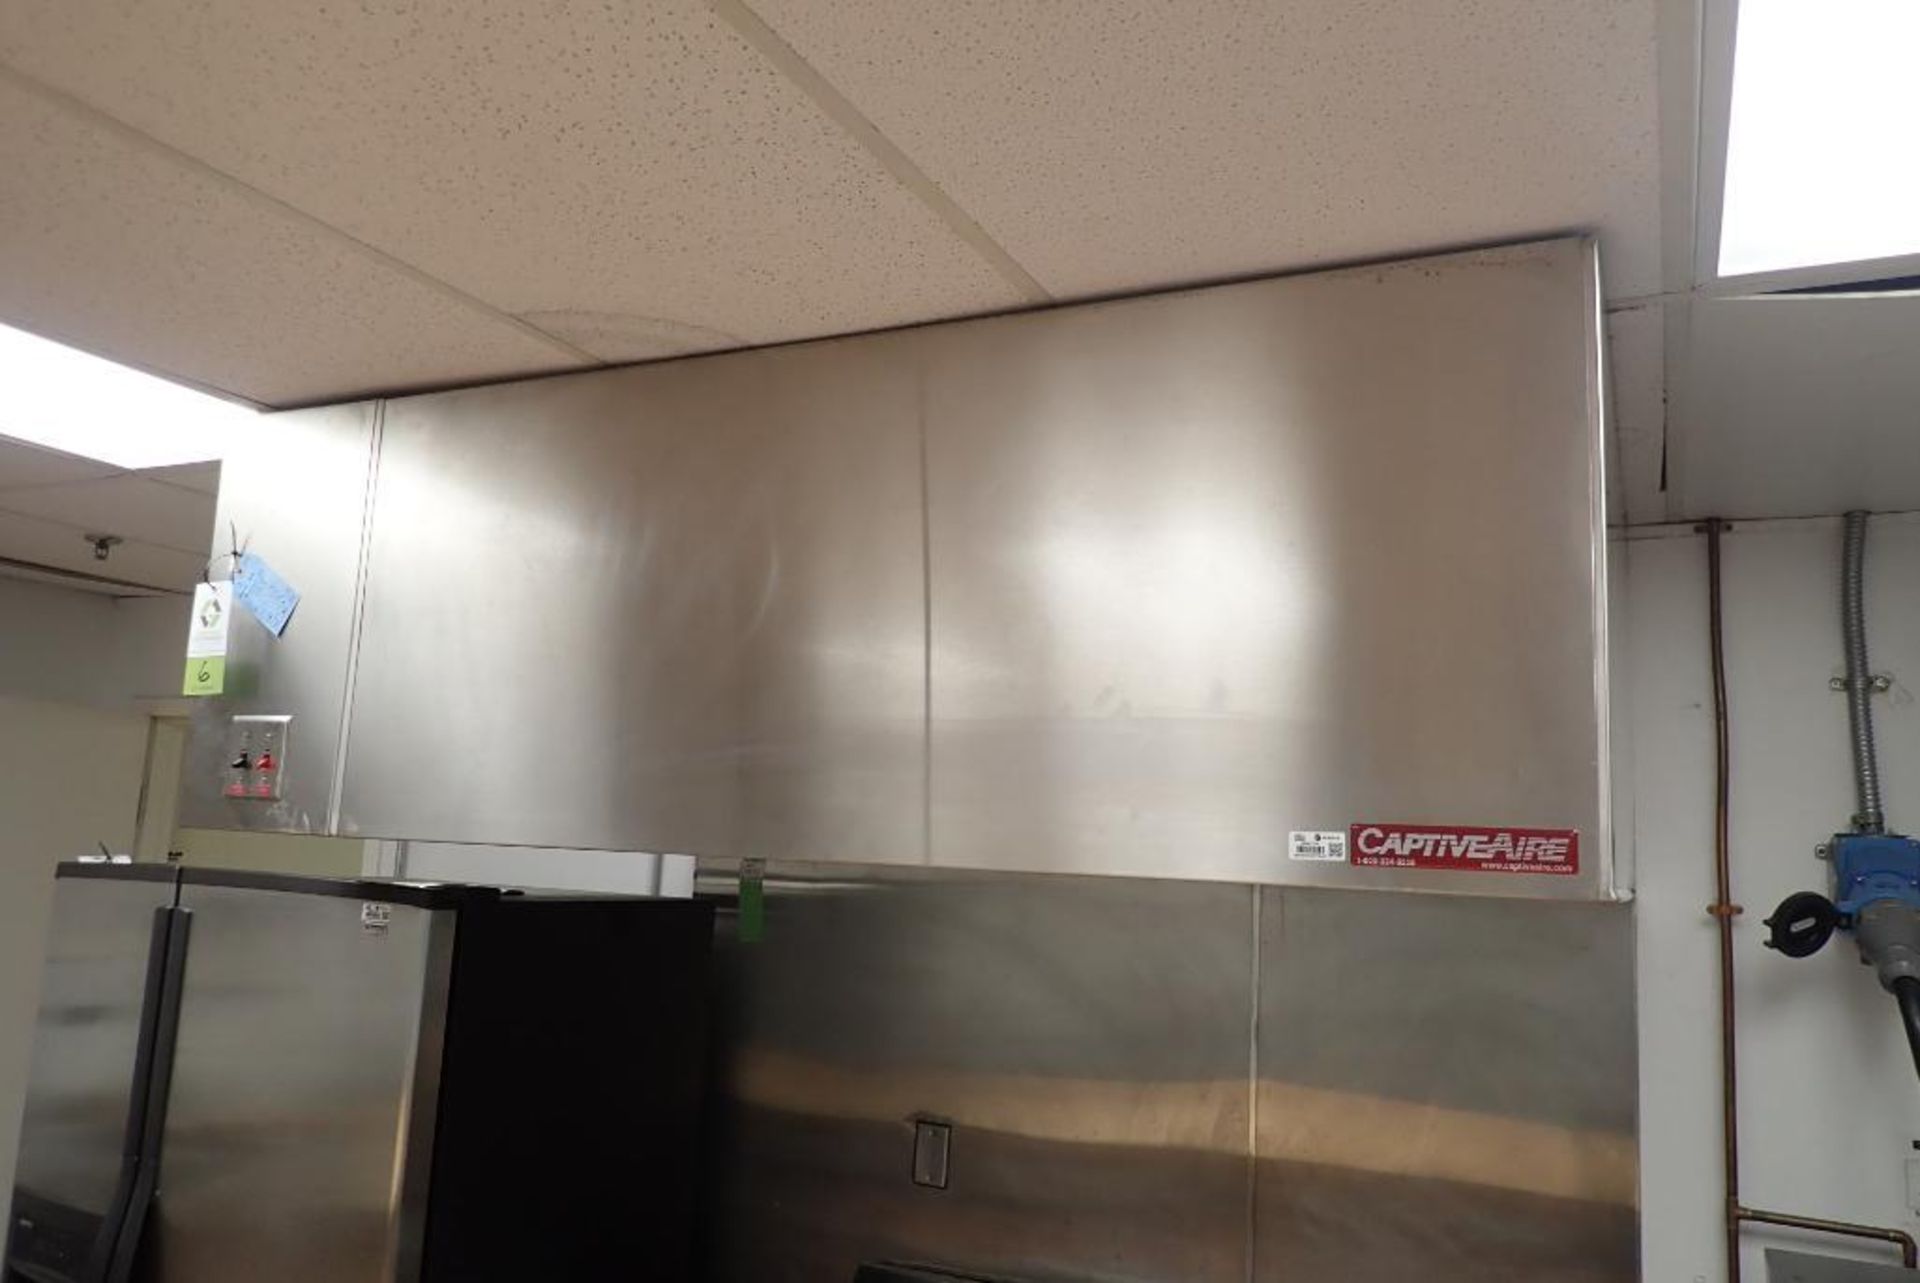 Captive Aire SS exhaust hood with fire suppression and lights